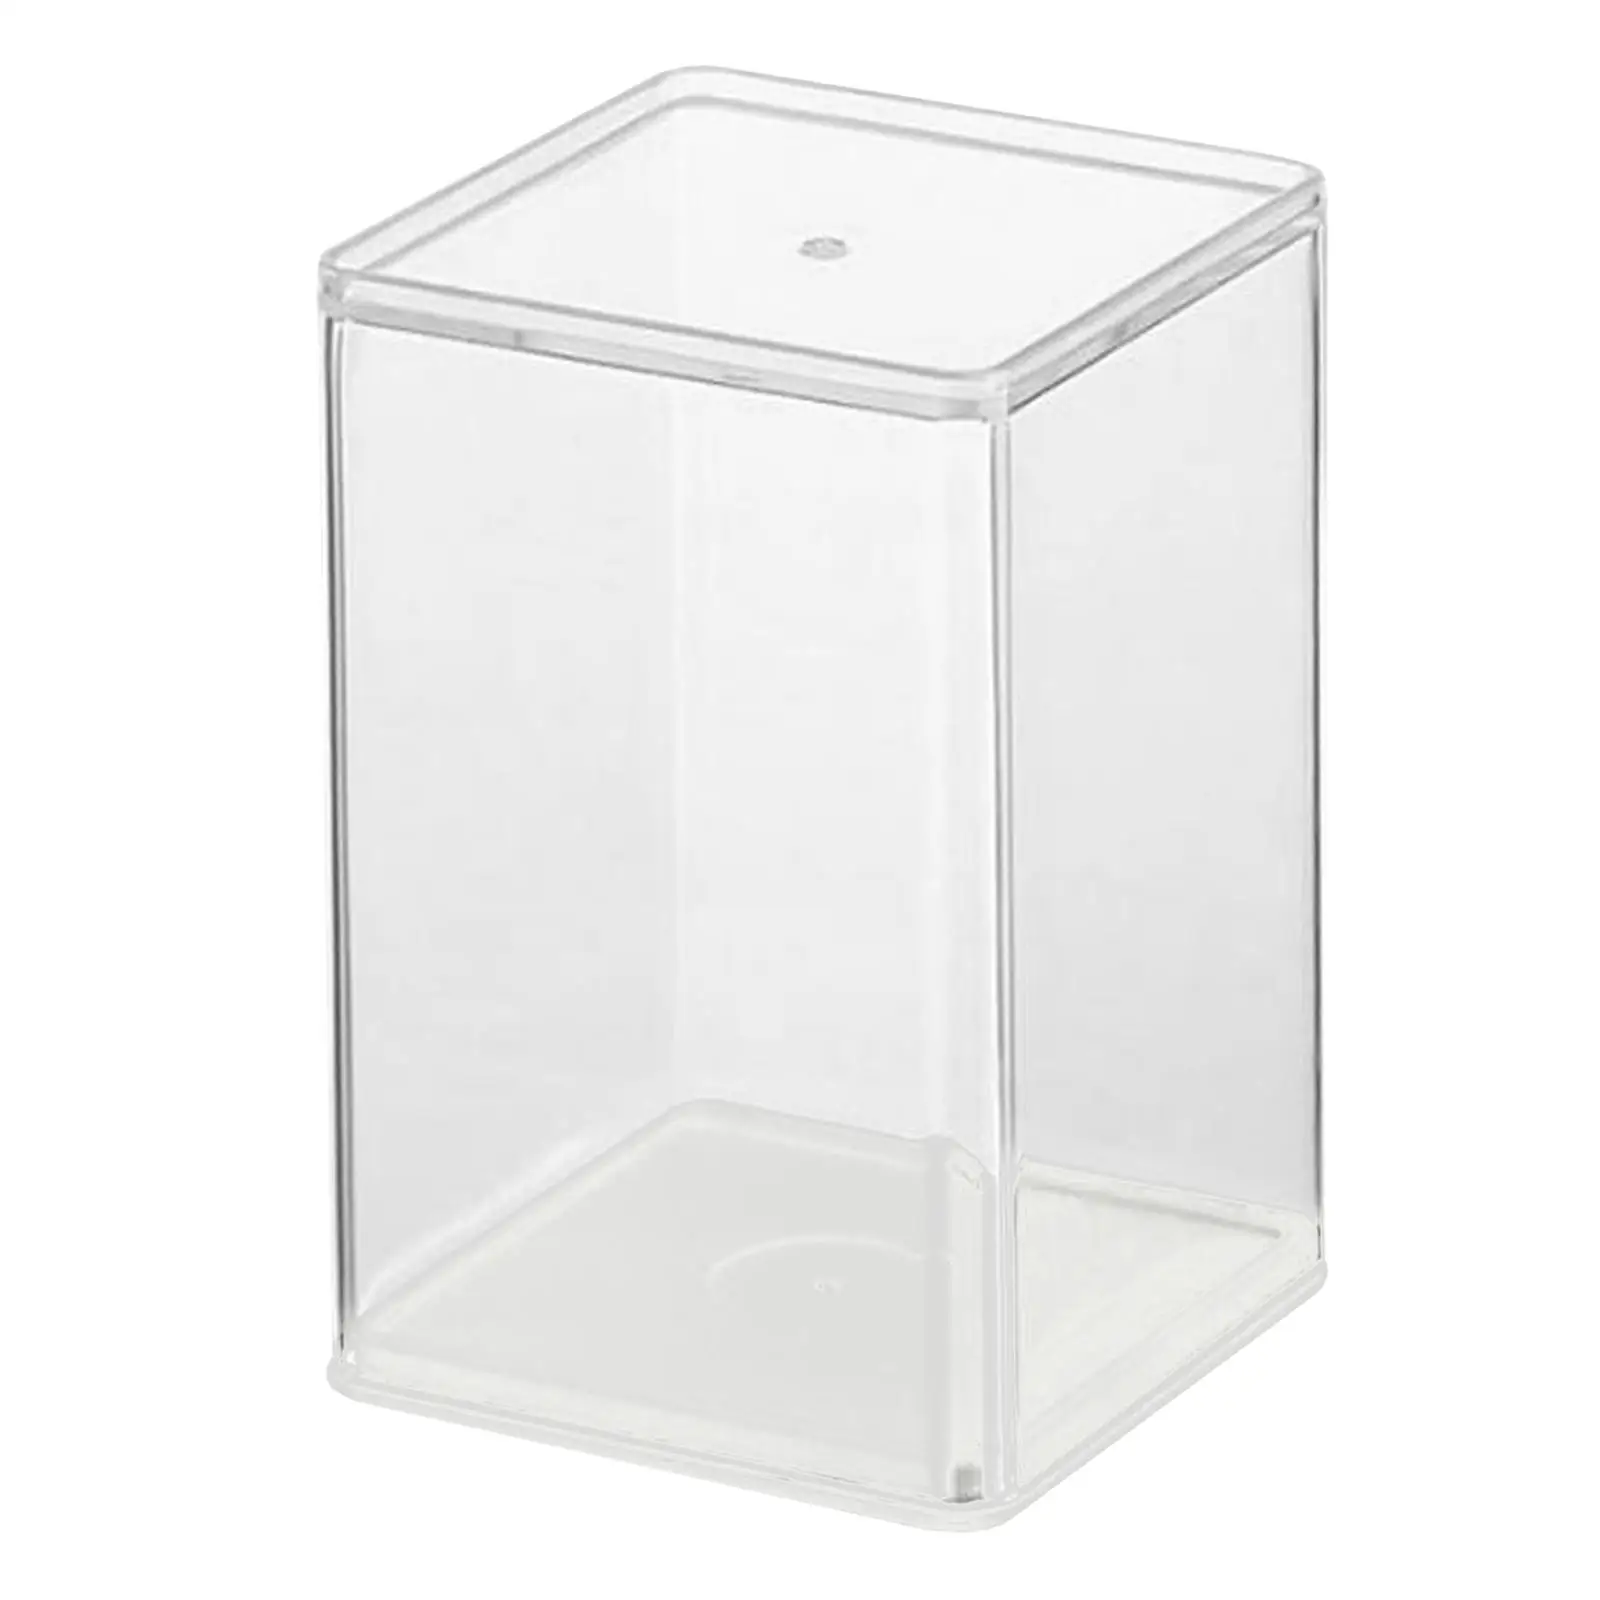 Clear Acrylic Display Case Shelves Free Standing Dustproof Stand Protection Dust Cabinet Storage Box for Collectibles Toys Kids